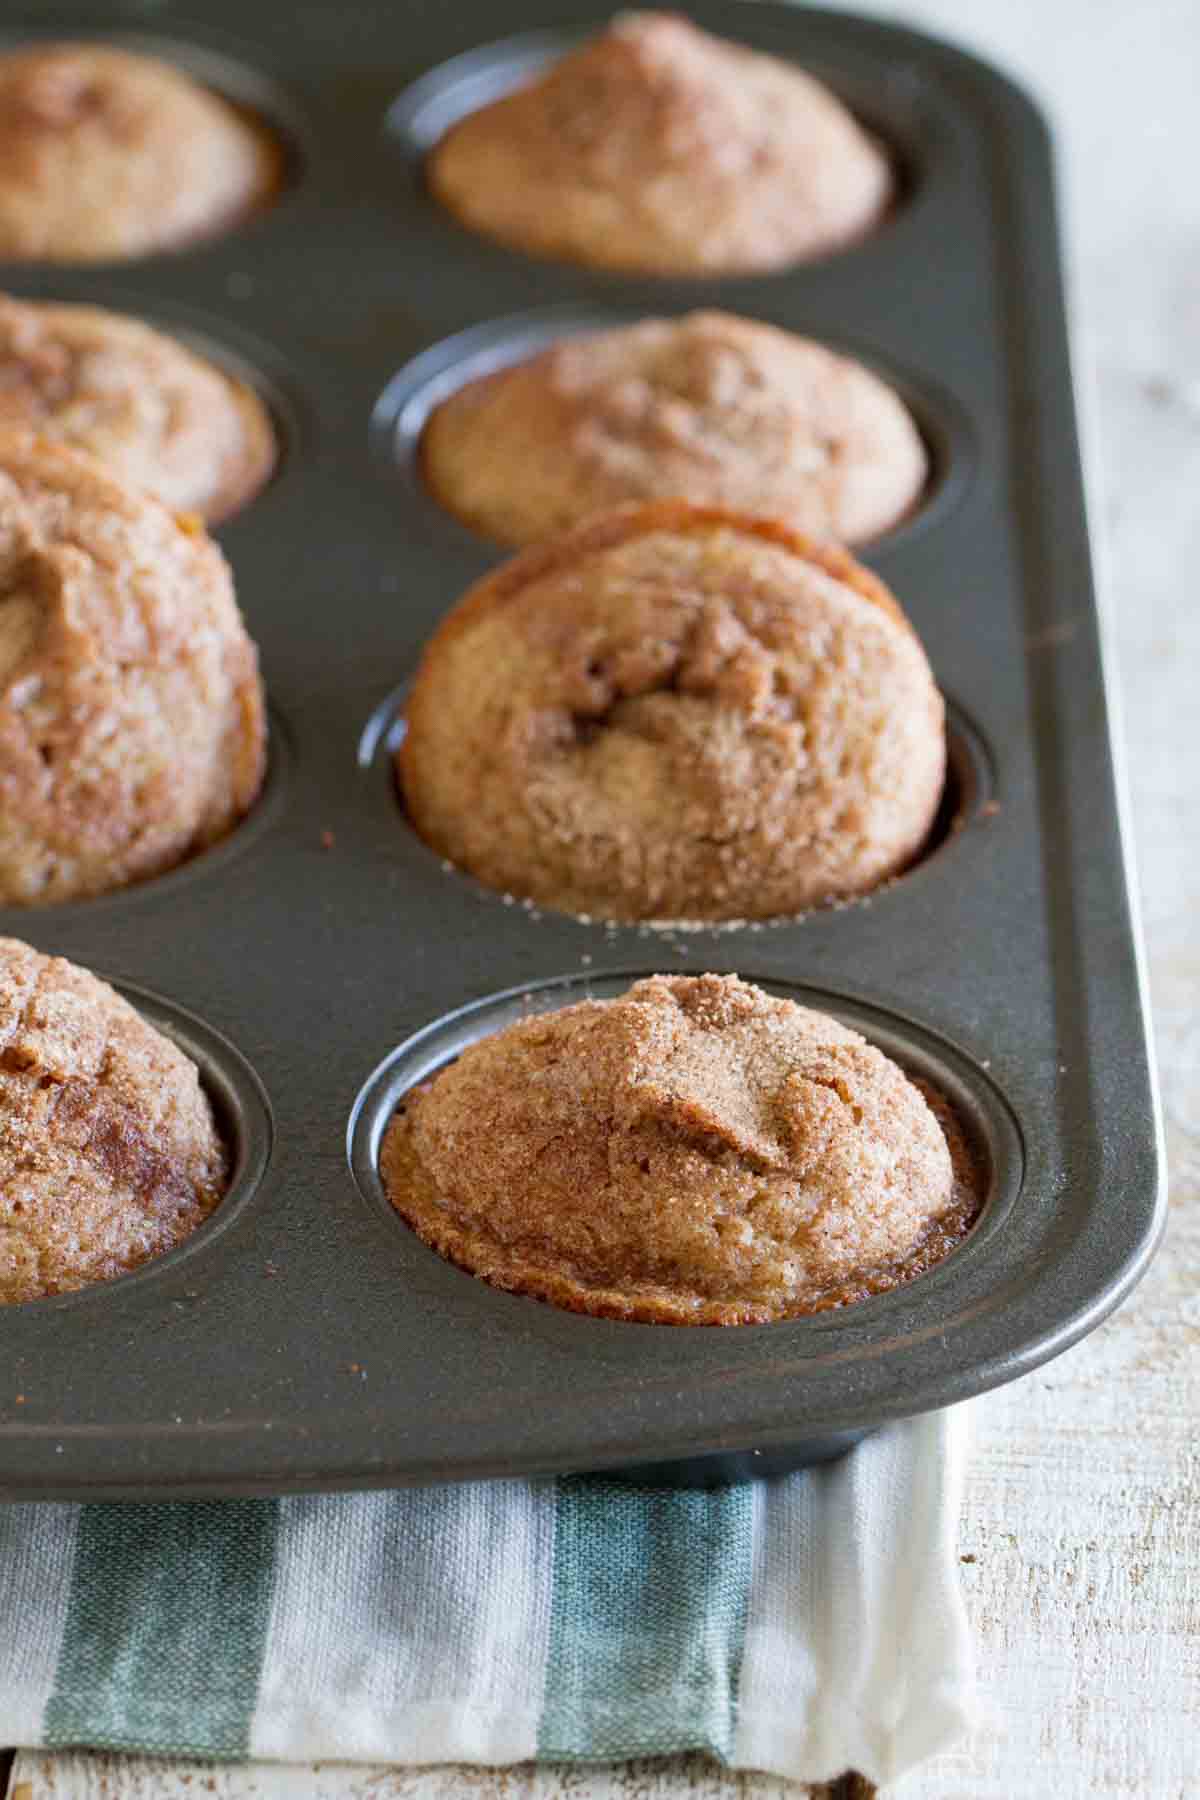 15 Best Fall Muffin Recipes That Are Yummy